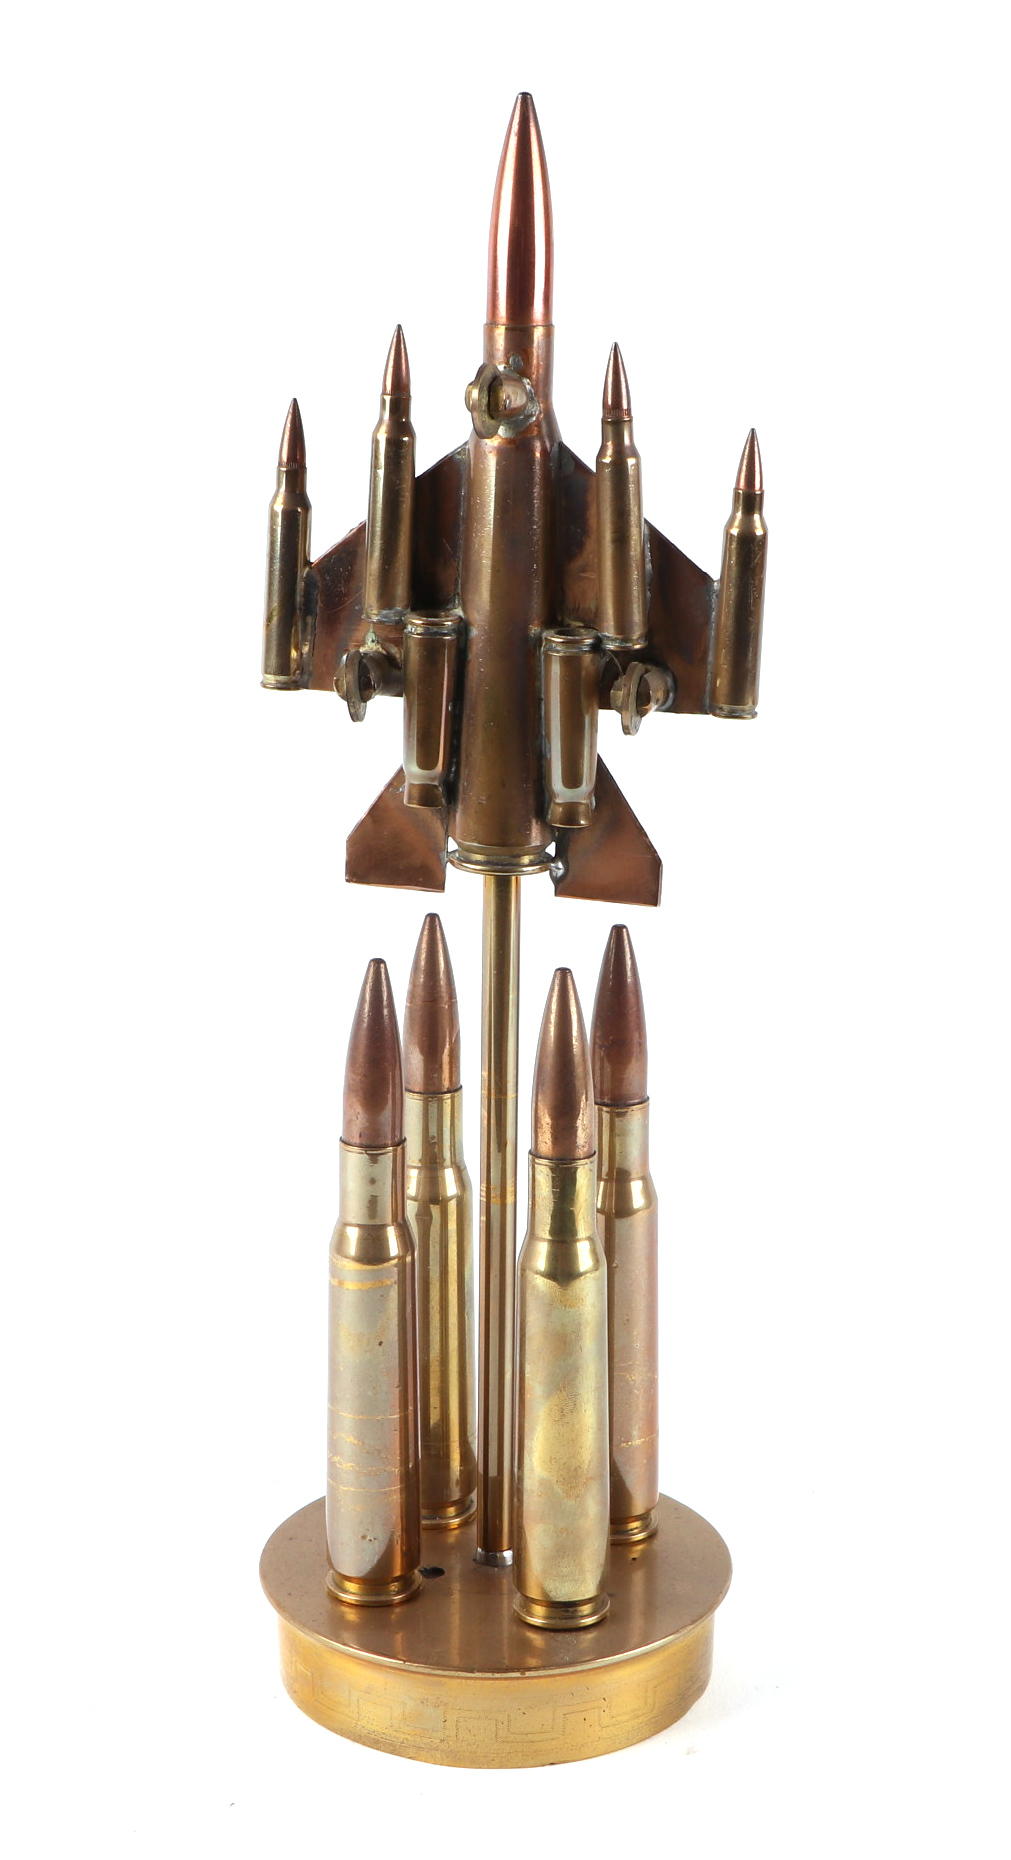 A trench art cast brass model of a Jet aircraft, constructed from brass bullets, mounted on a - Image 2 of 2